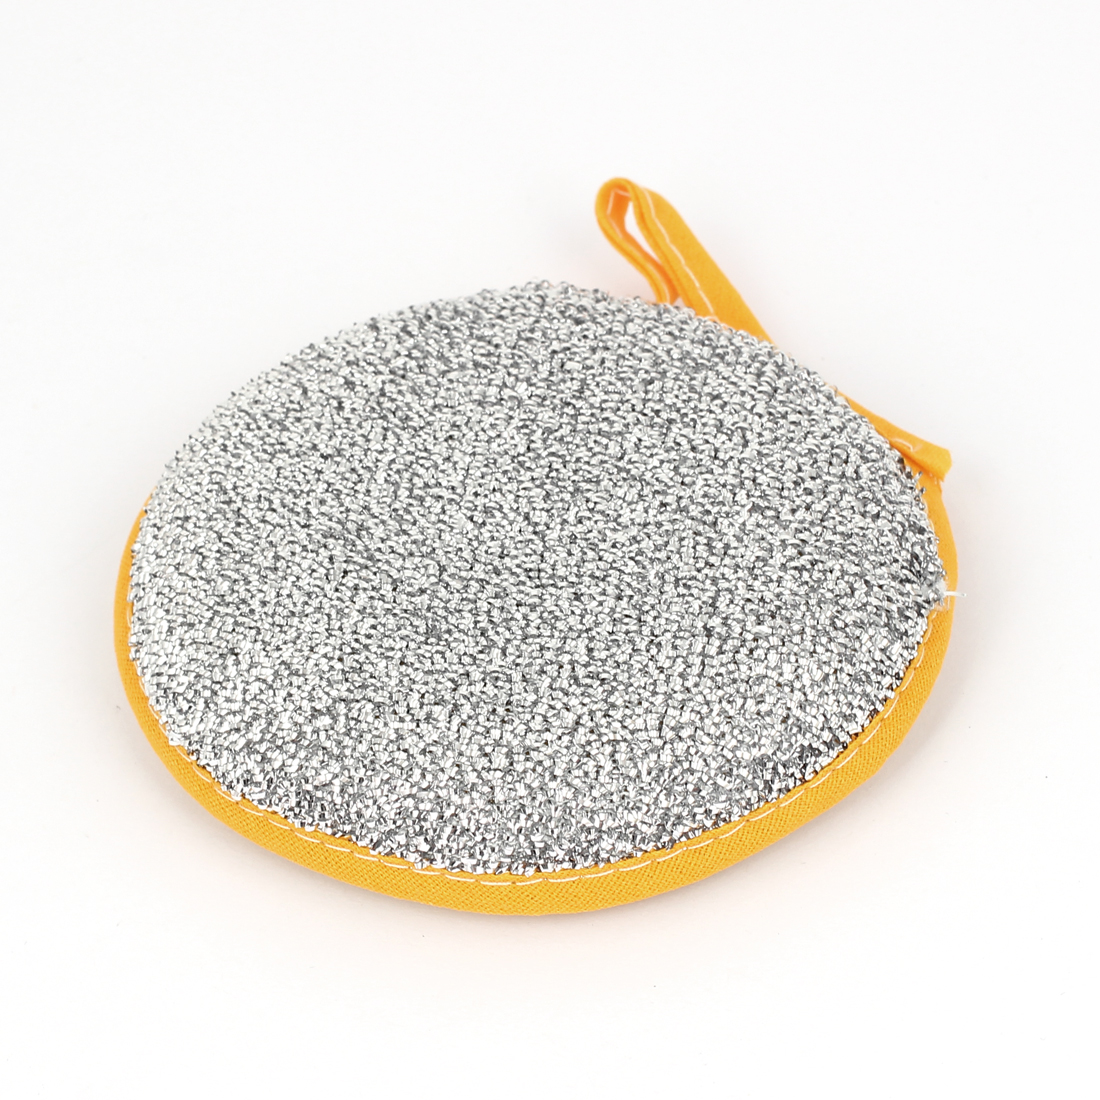 Unique Bargains Kitchen Bowl Dish Cleaning Round Shape Double Sided Scouring Pad Sponge Scrubber